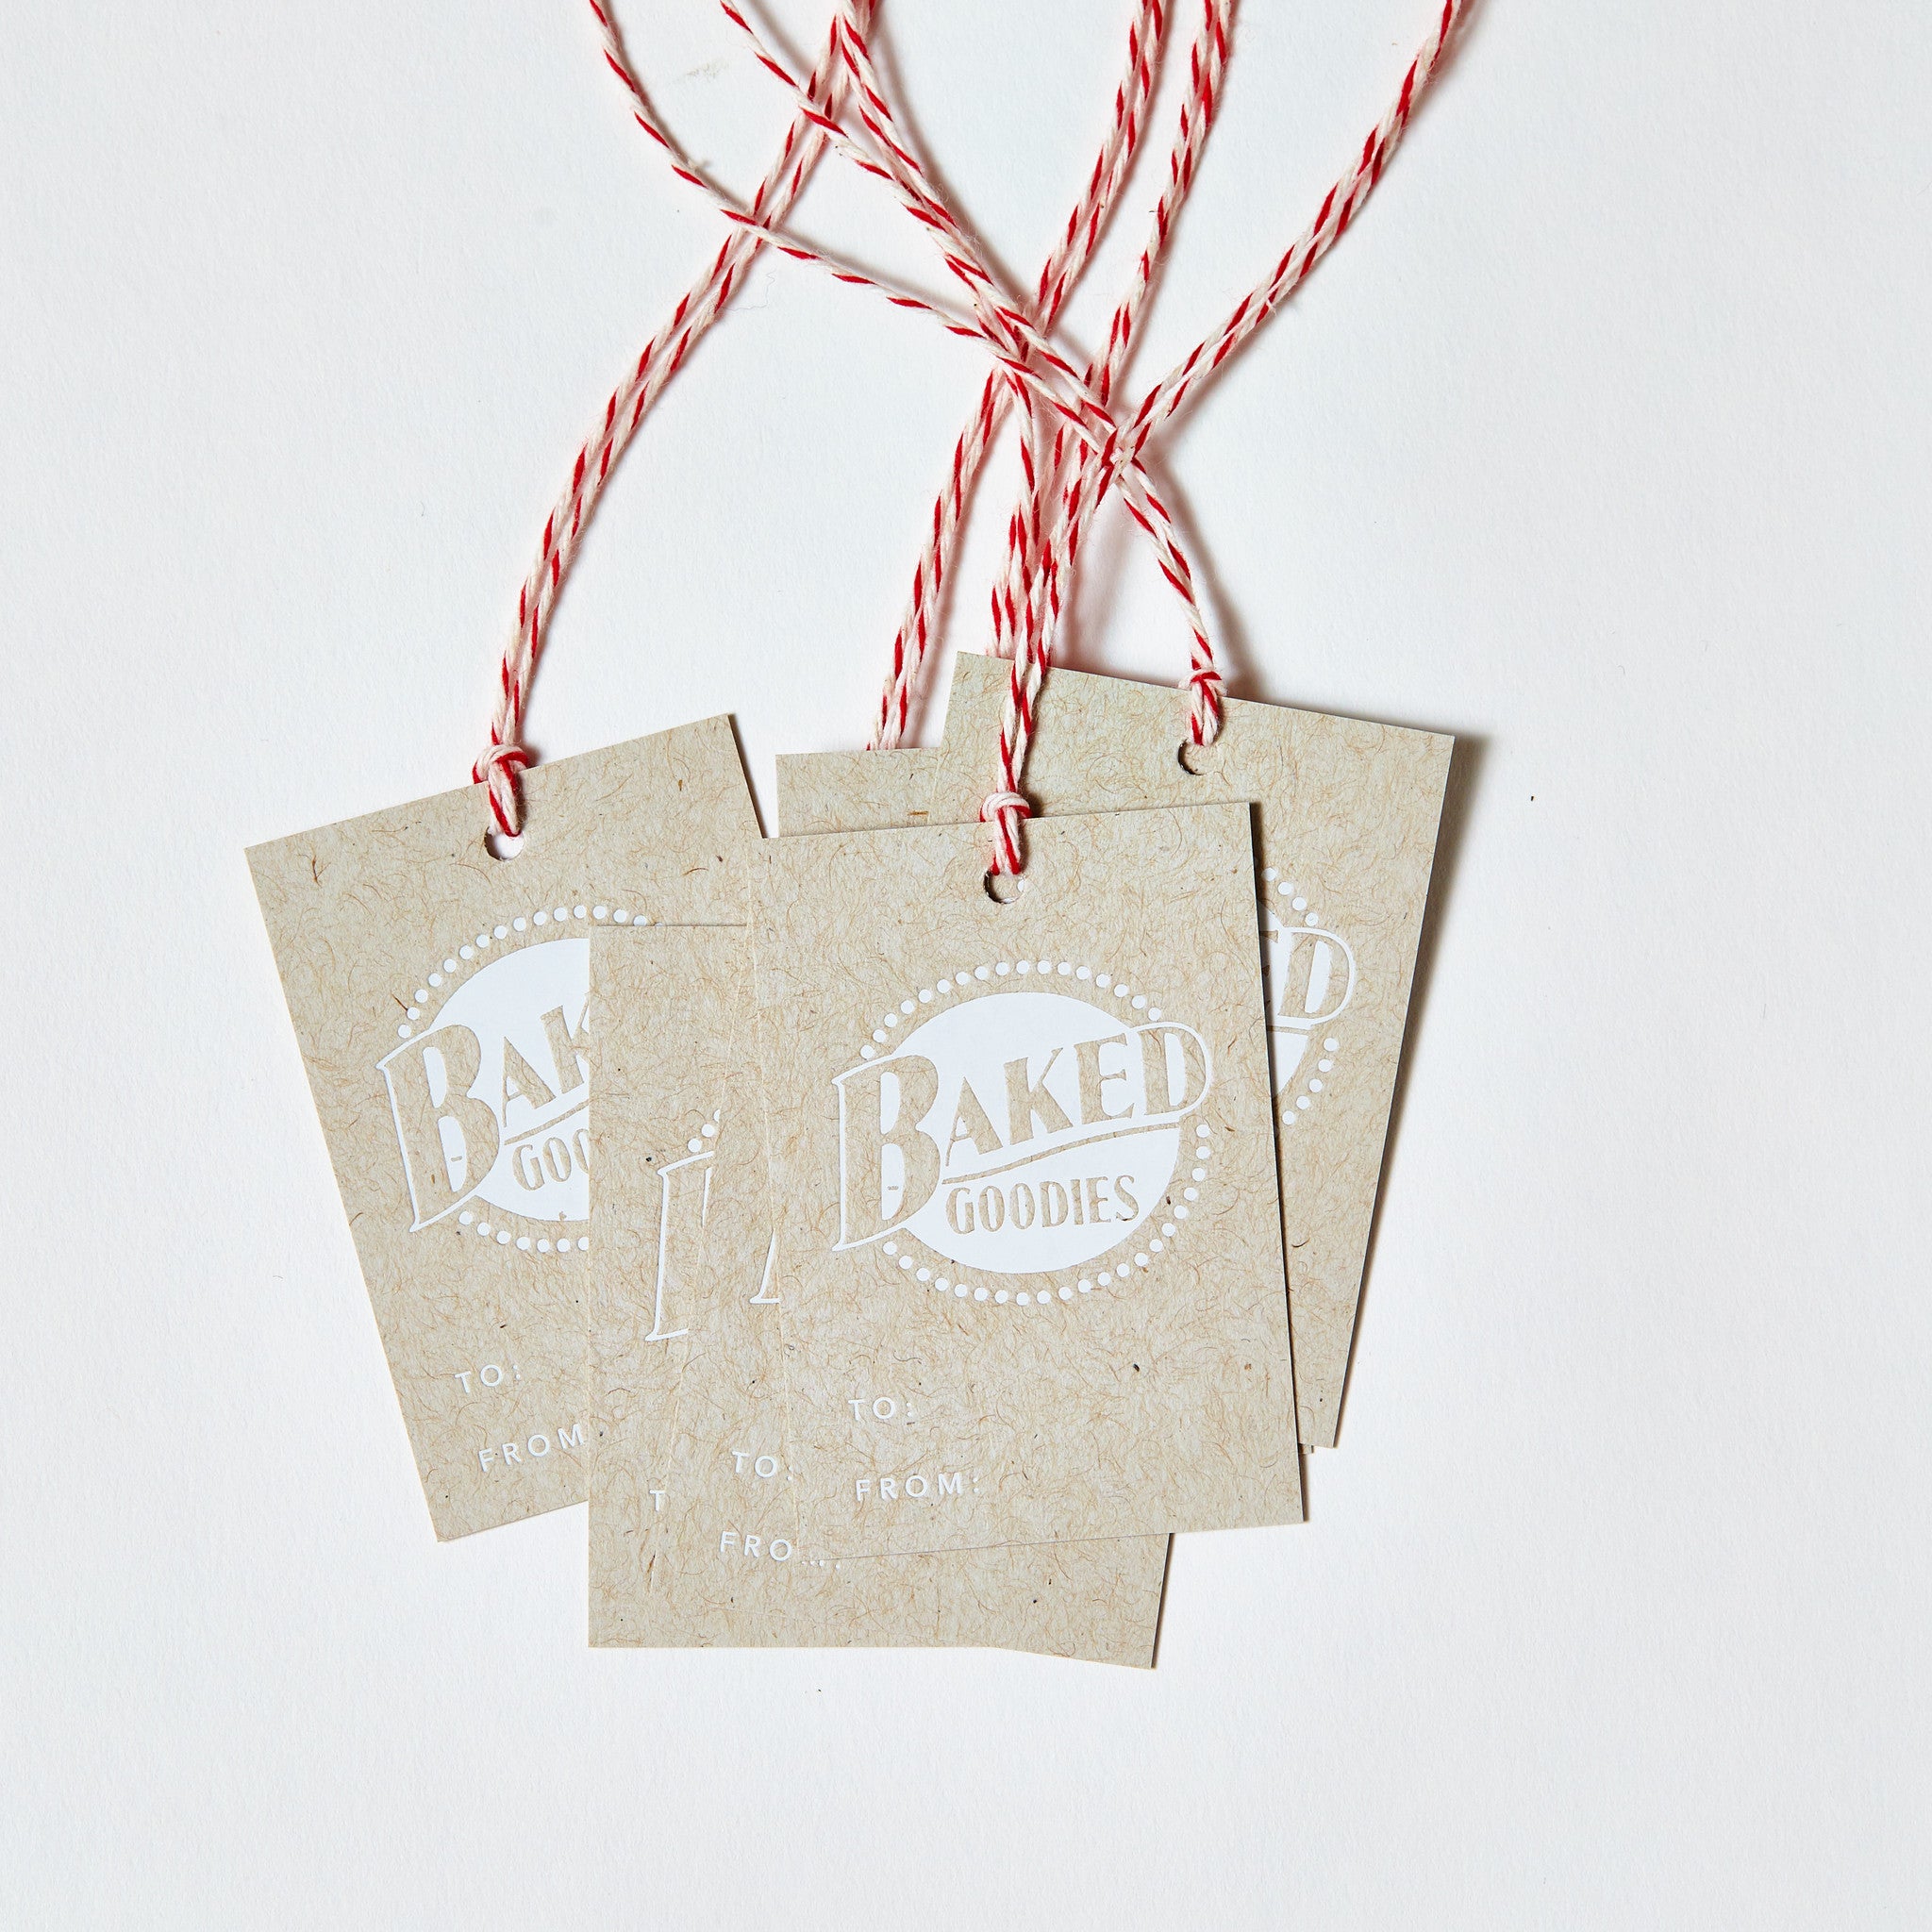 Set of 6, White Foil Printed Gift Tags - Baked Goodies